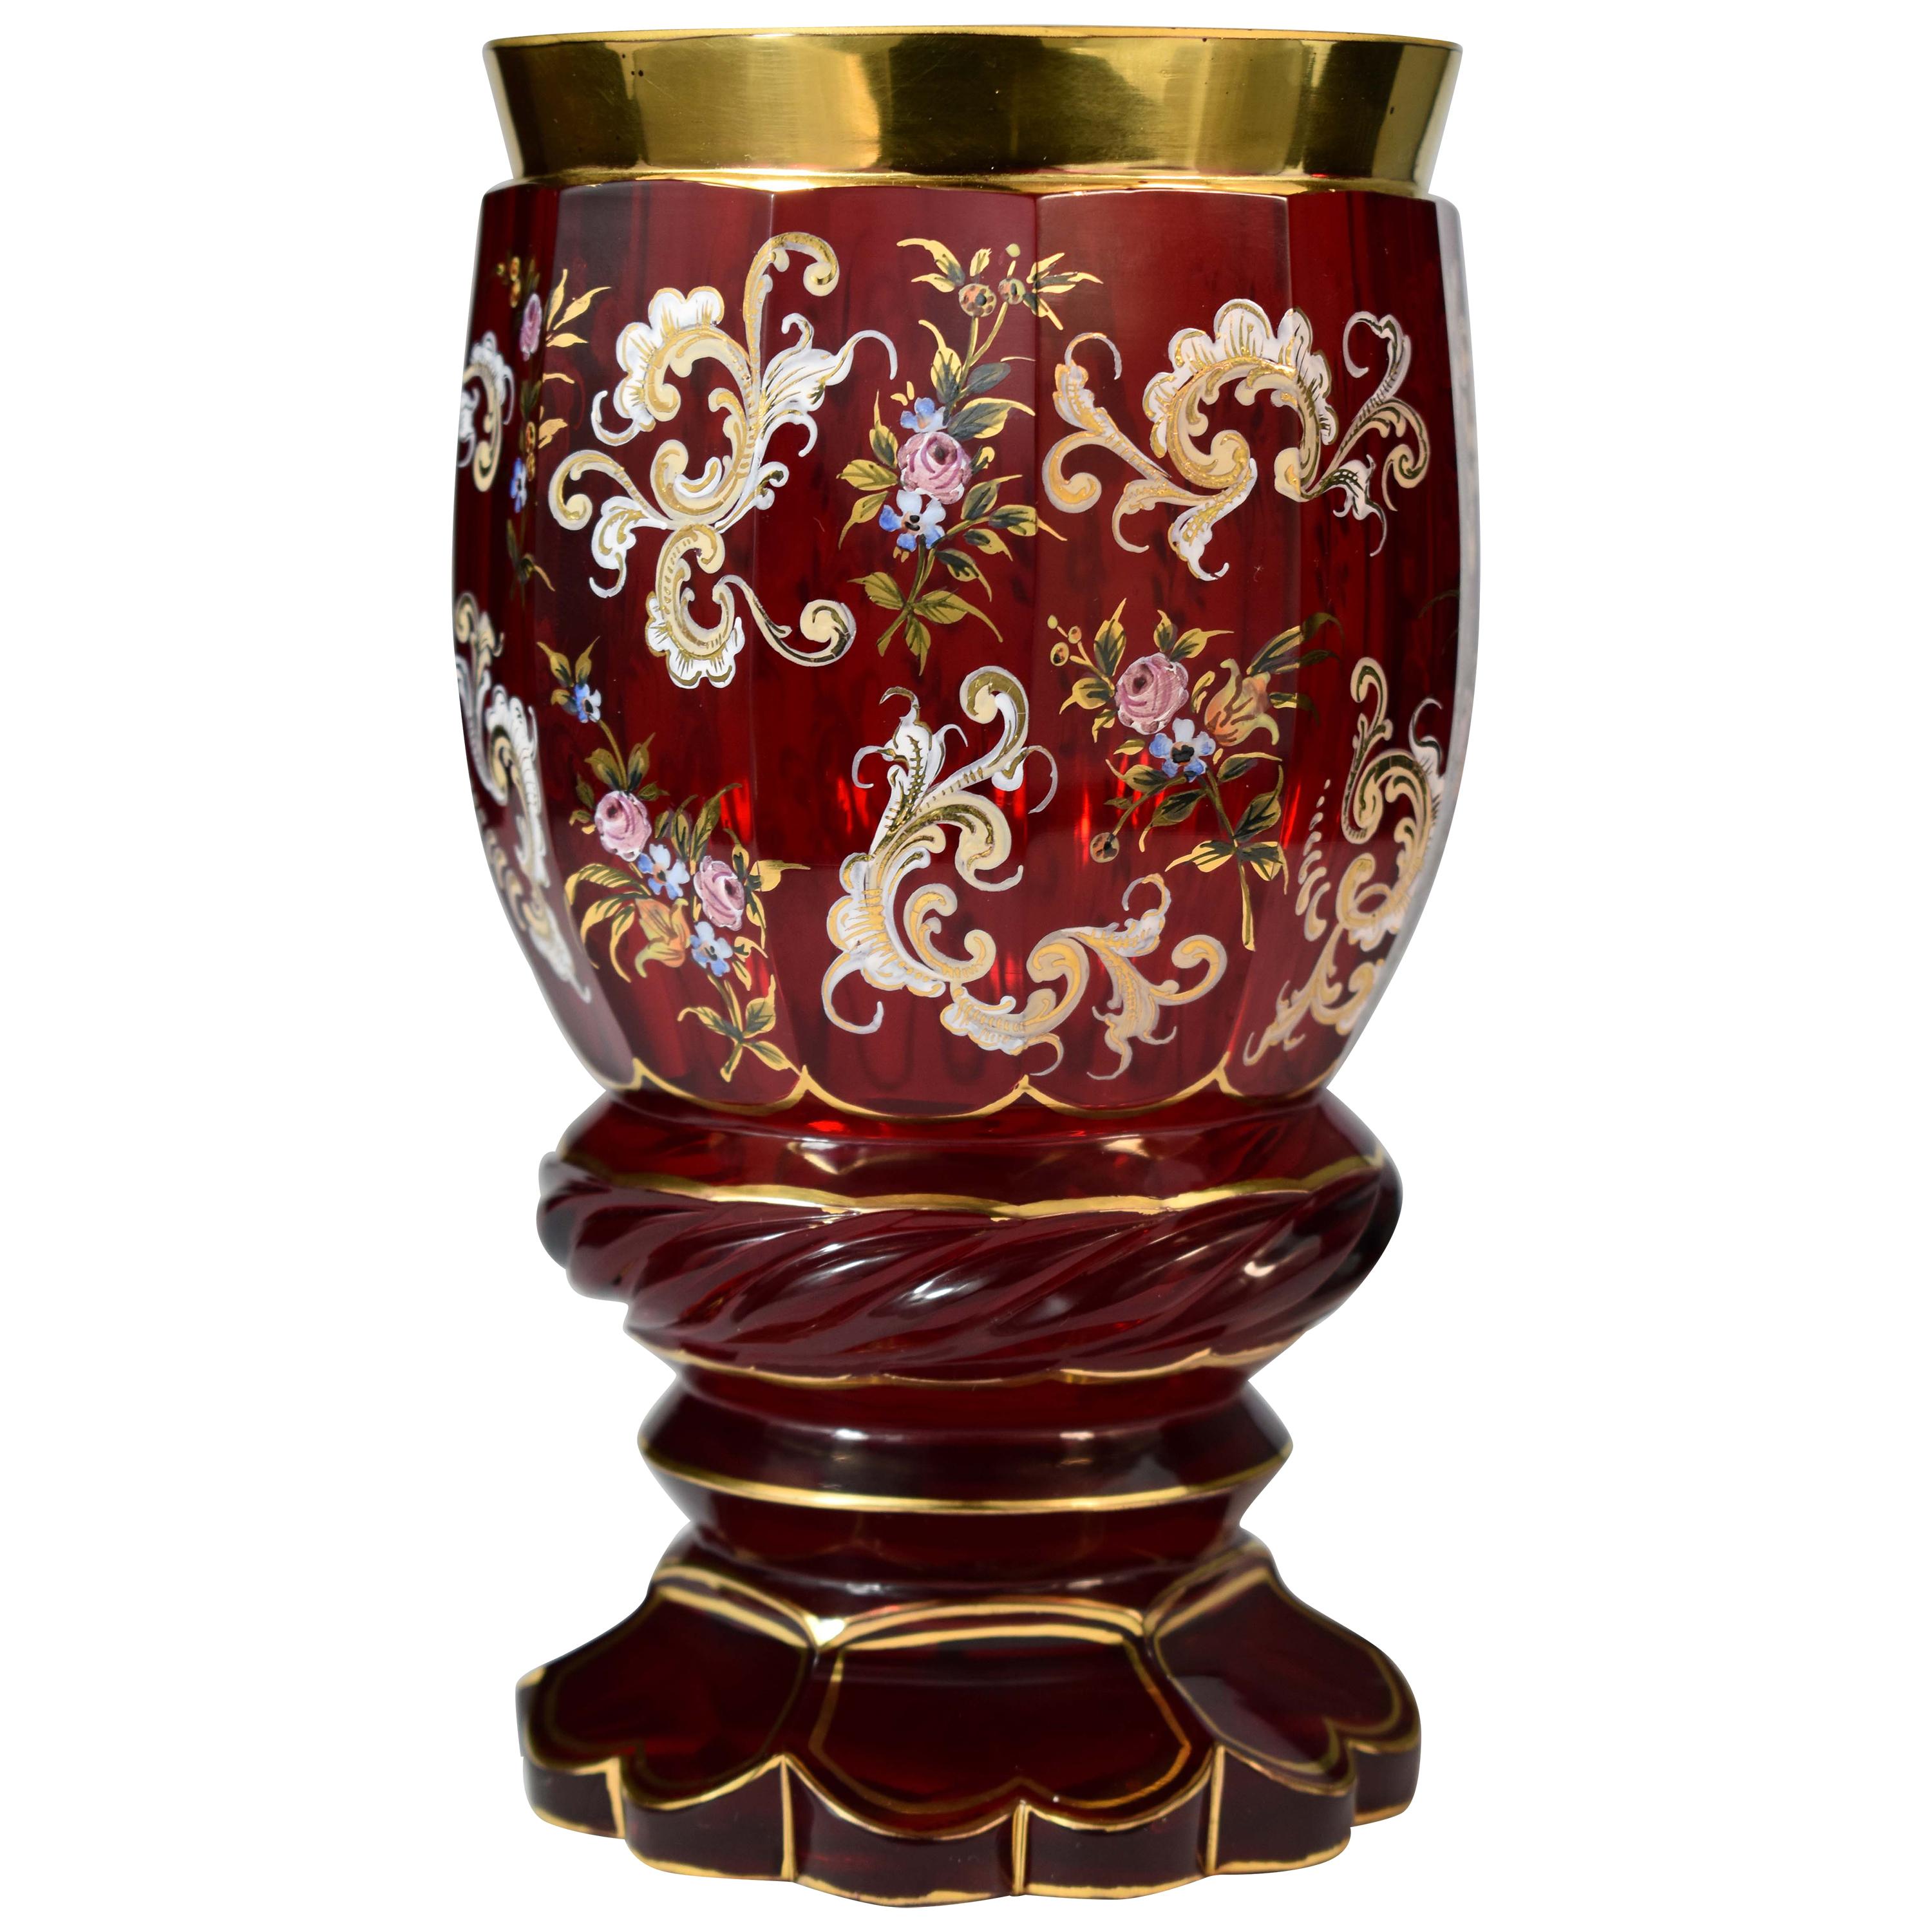 Vintage Bohemian/Czech Type Hand-Blown Art Glass Vase Made In Japan Hand-Painted Floral Motif With Gold Leaf and Swirl Pedestal